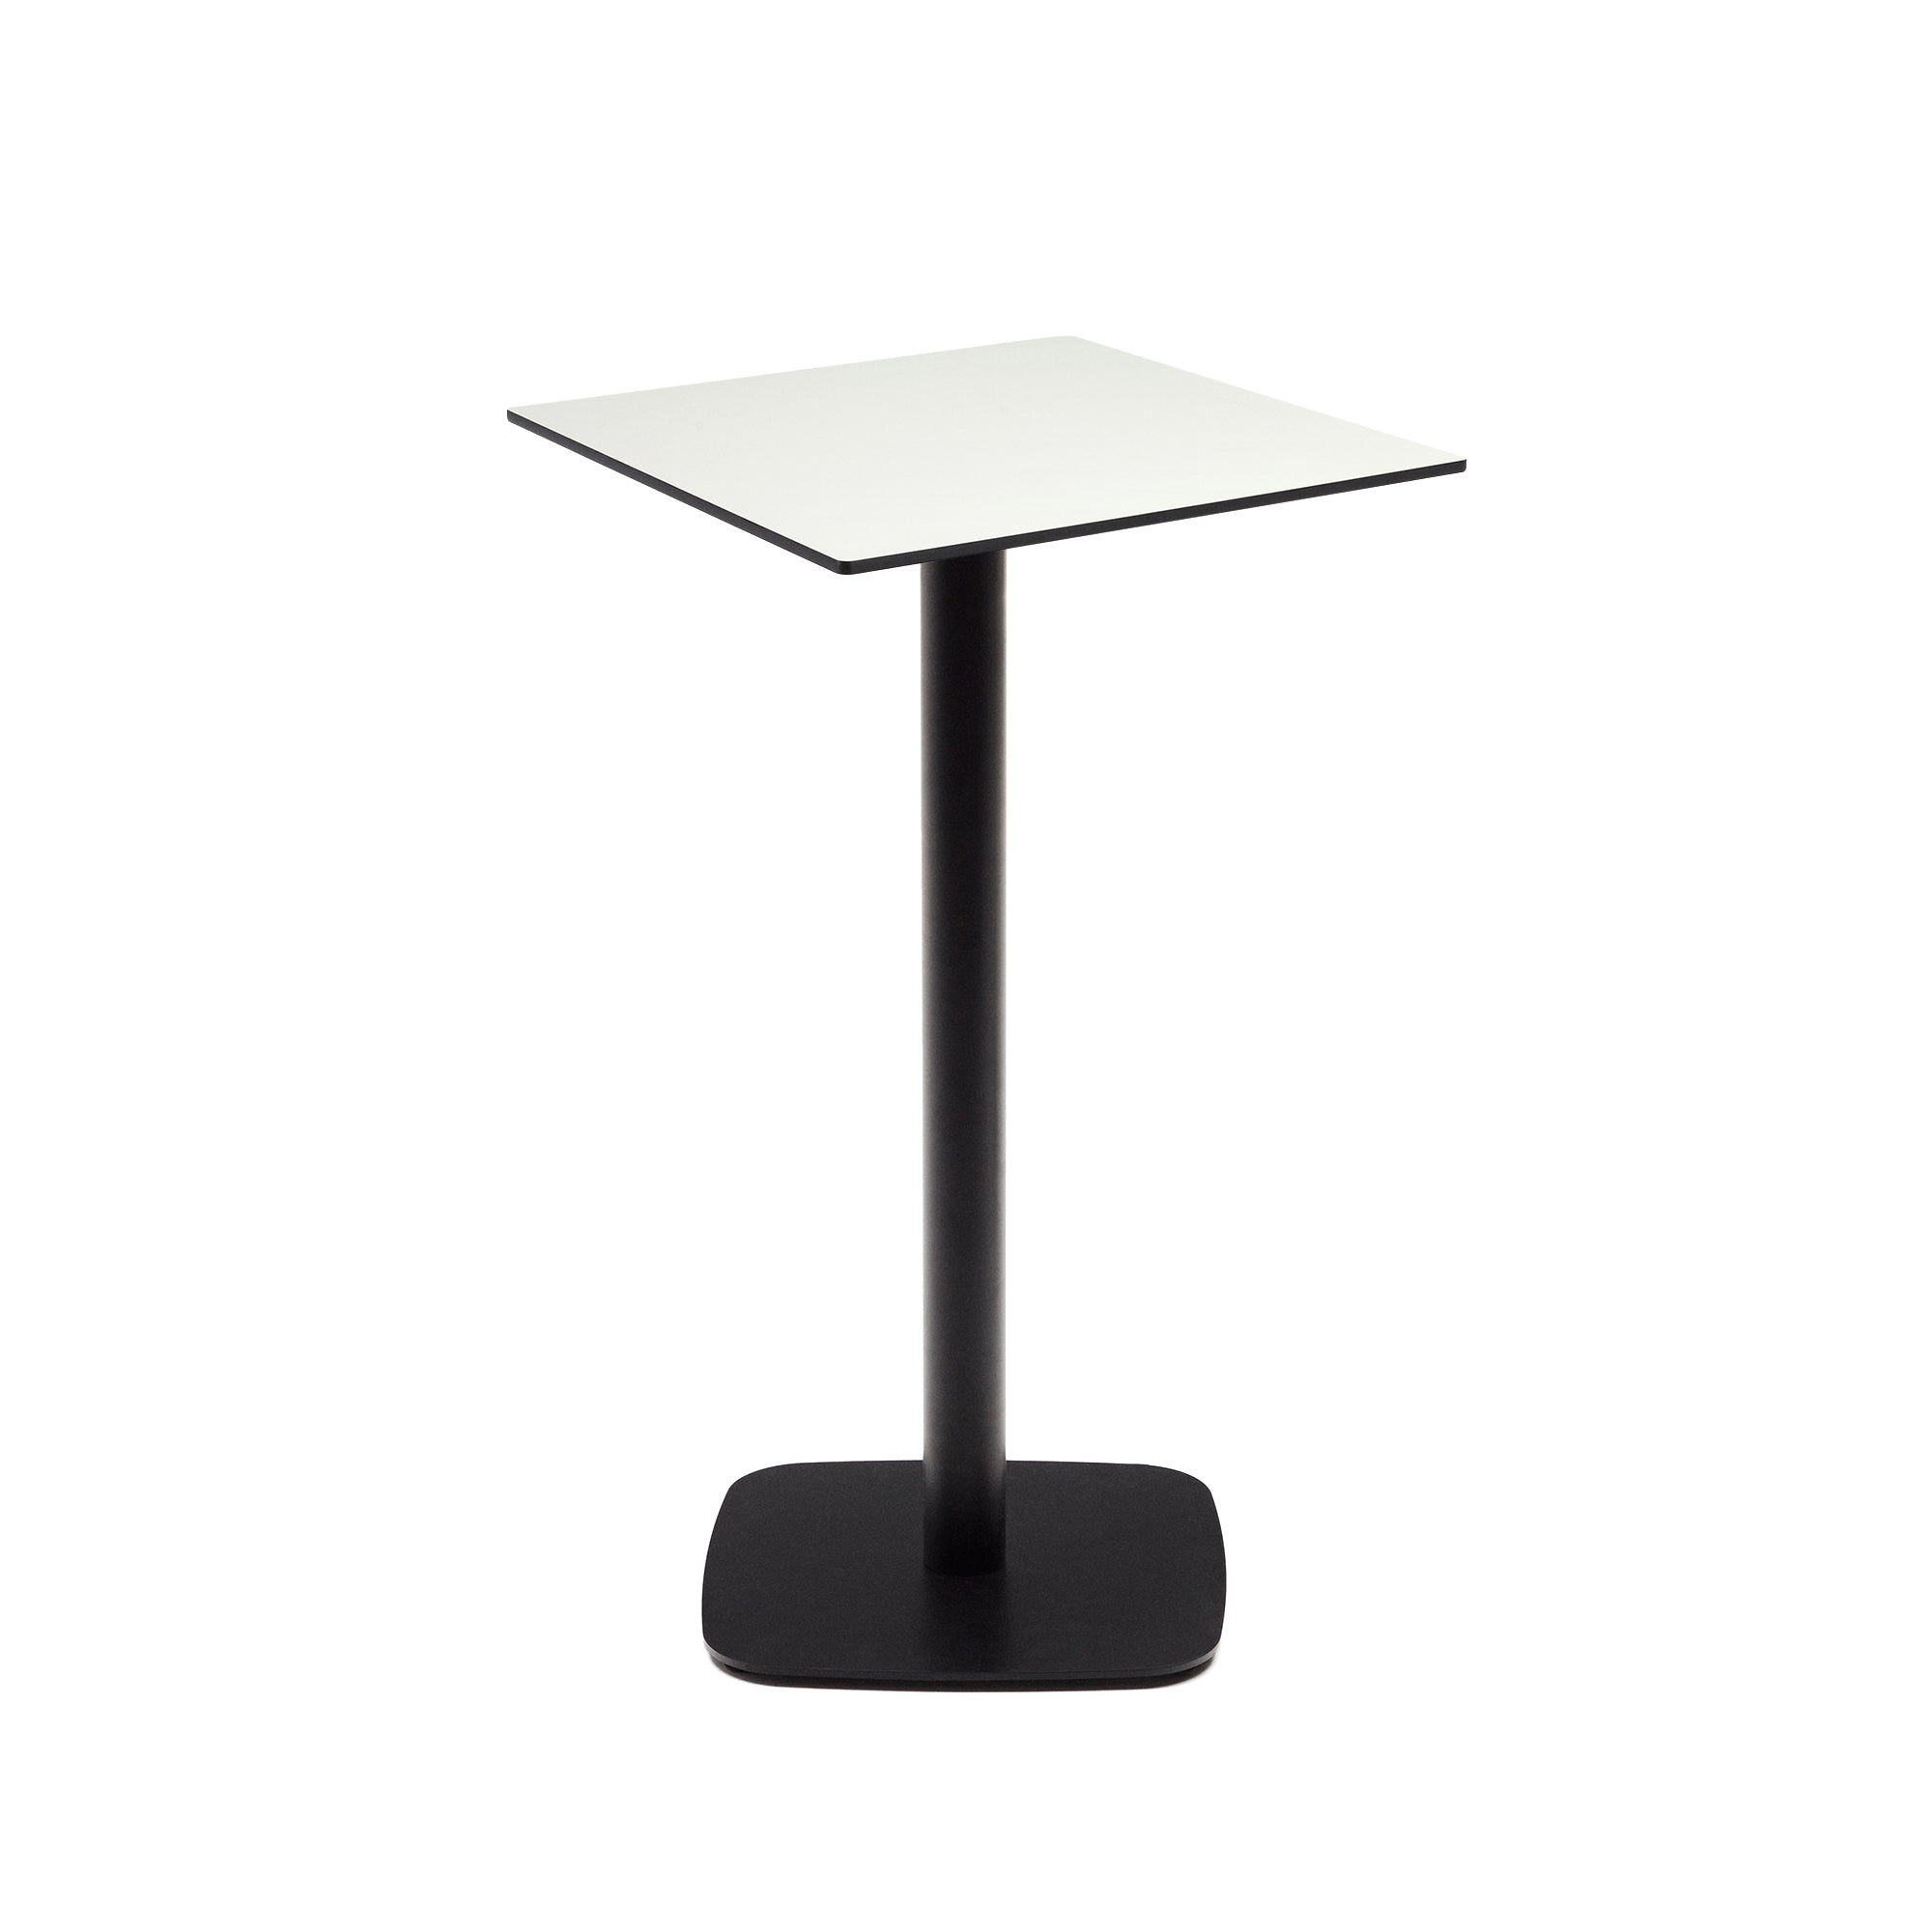 Dina high outdoor table in white with metal leg in a painted black finish, 60x60x96 cm